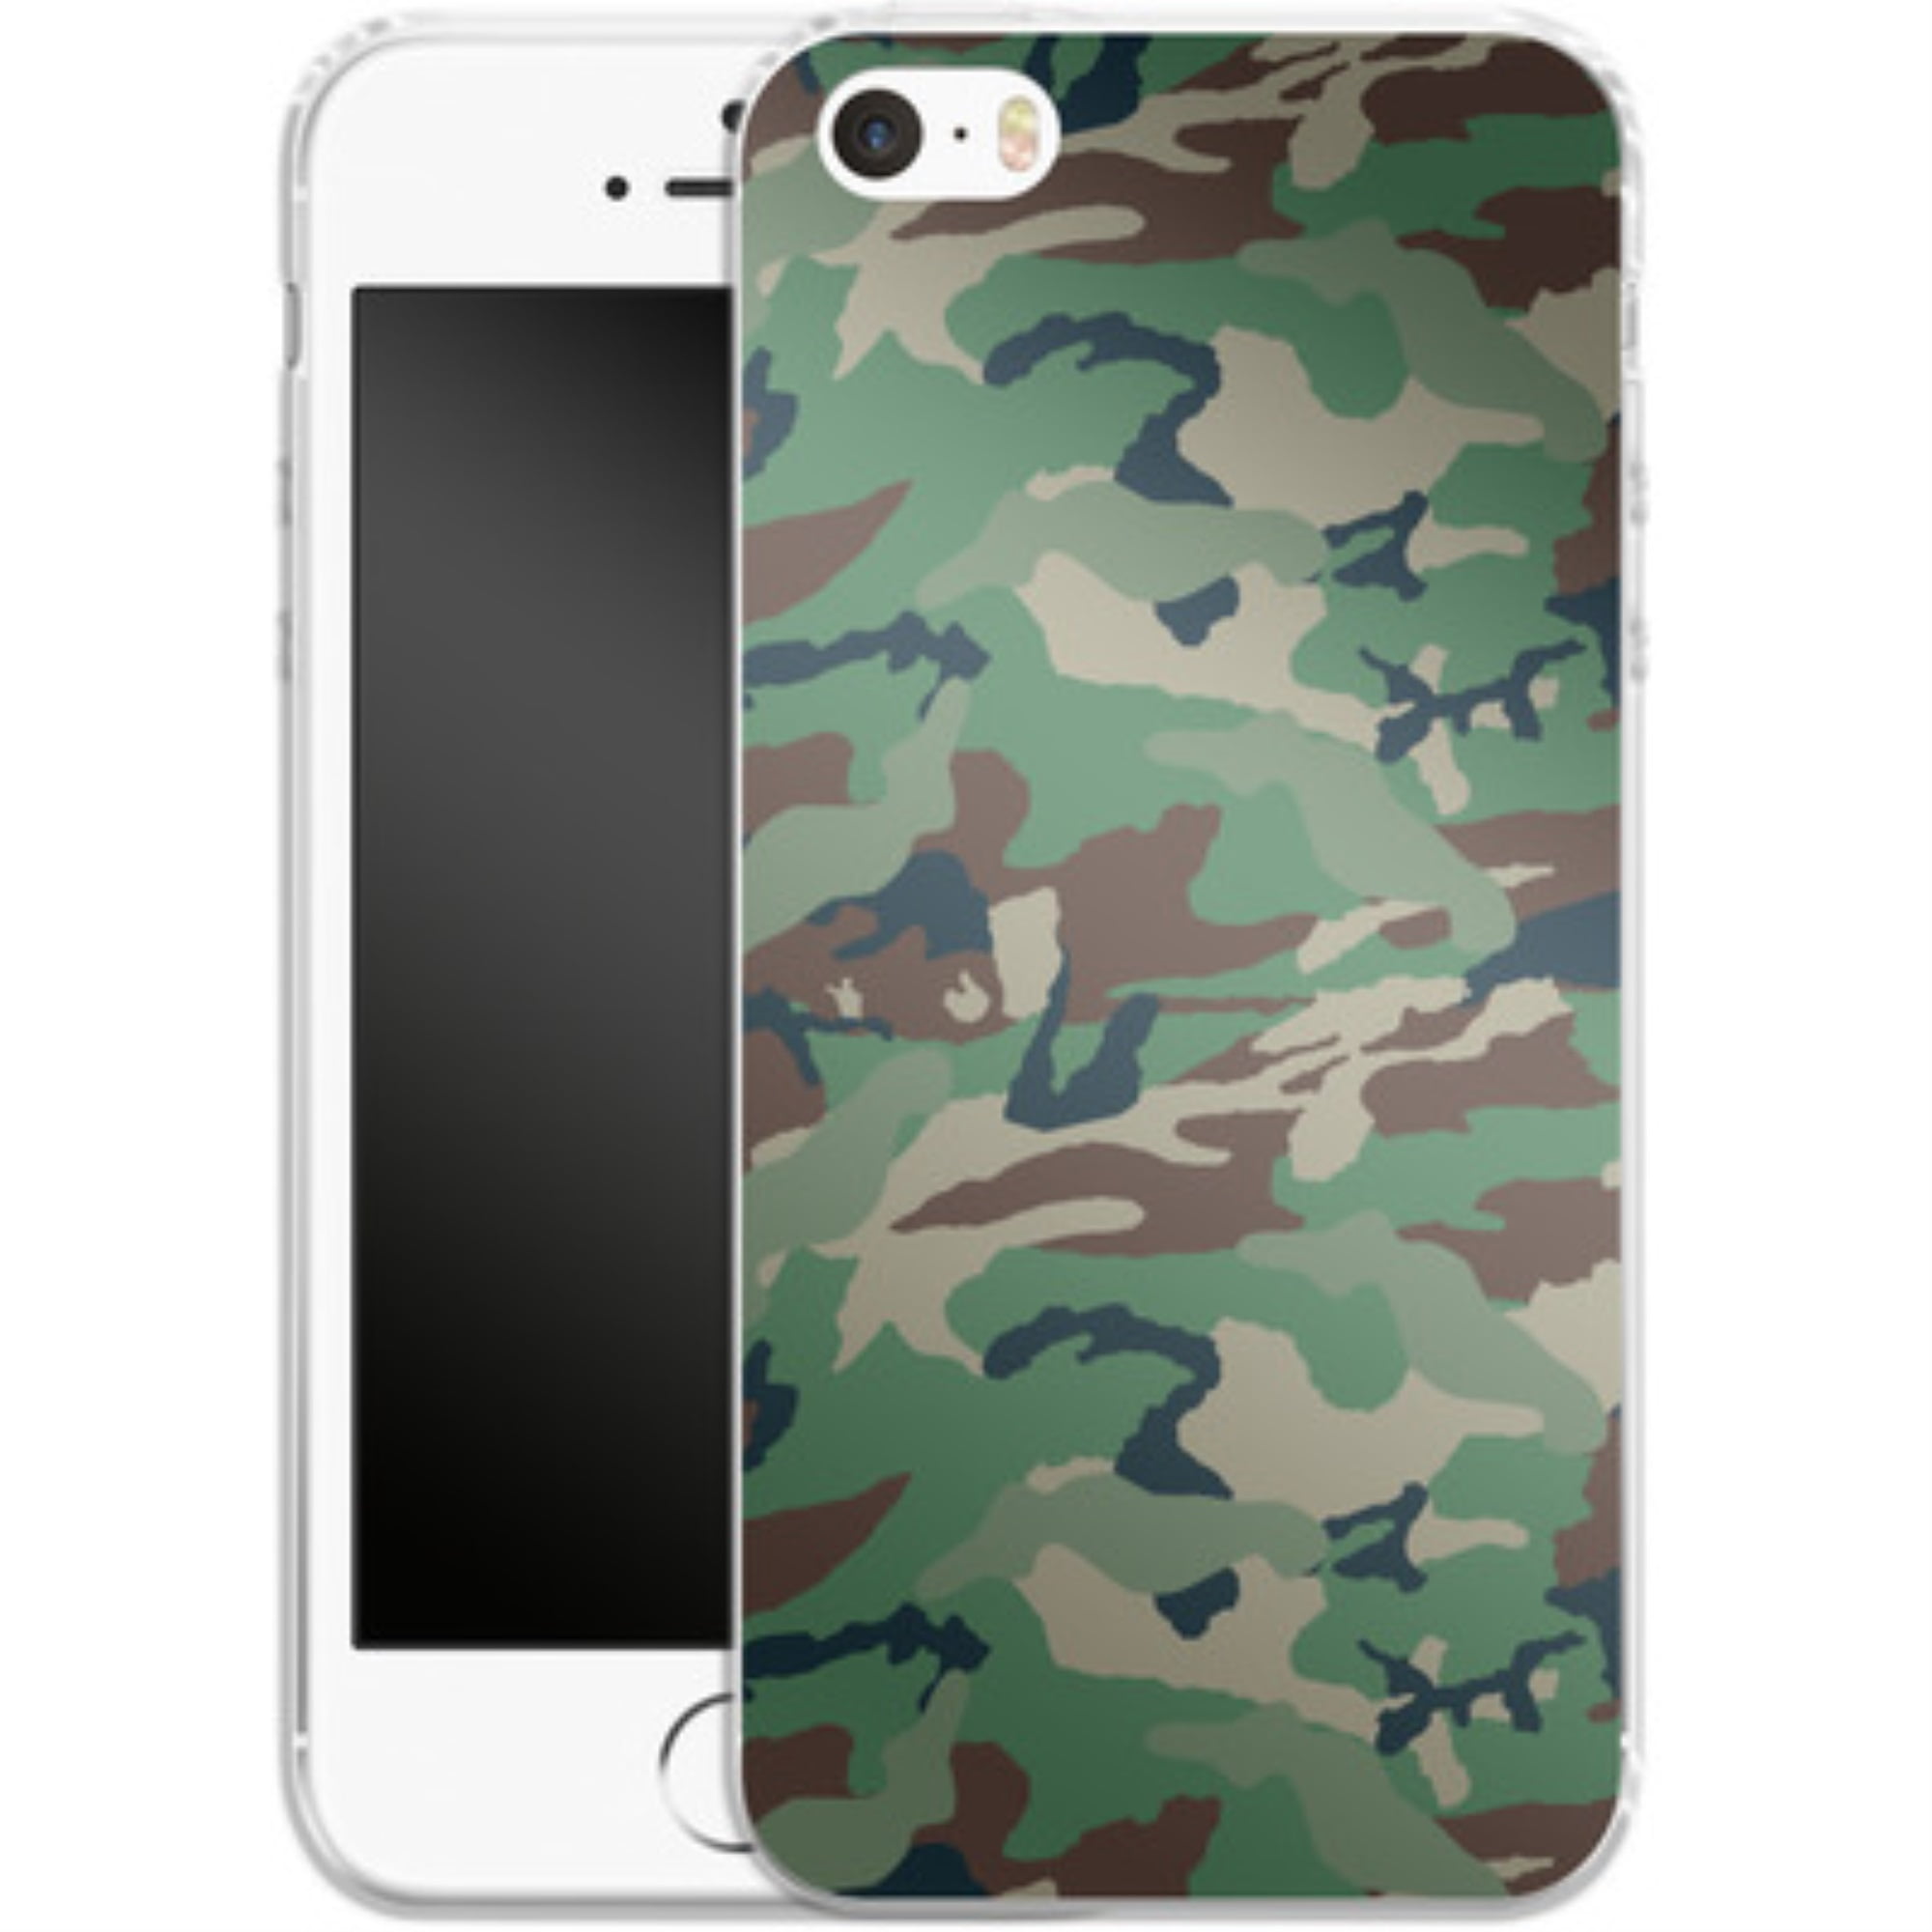 iPhone - Green and Brown Camo by Designs, Silicone Phone Case - Walmart.com